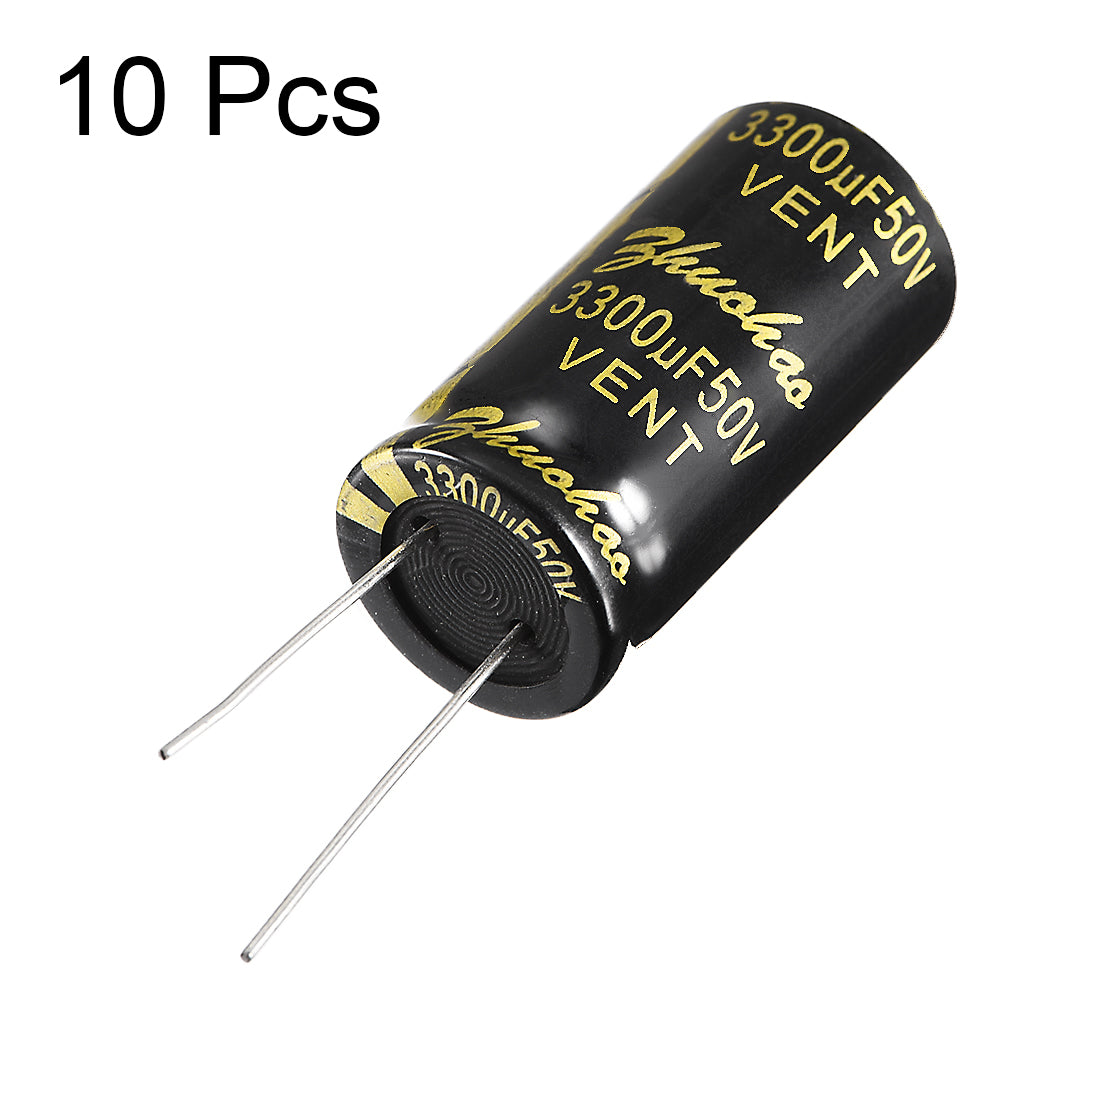 uxcell Uxcell Aluminum Radial Electrolytic Capacitor with 3300uF 50V 105 Celsius Life 2000H 18 x 36 mm Black 10pcs